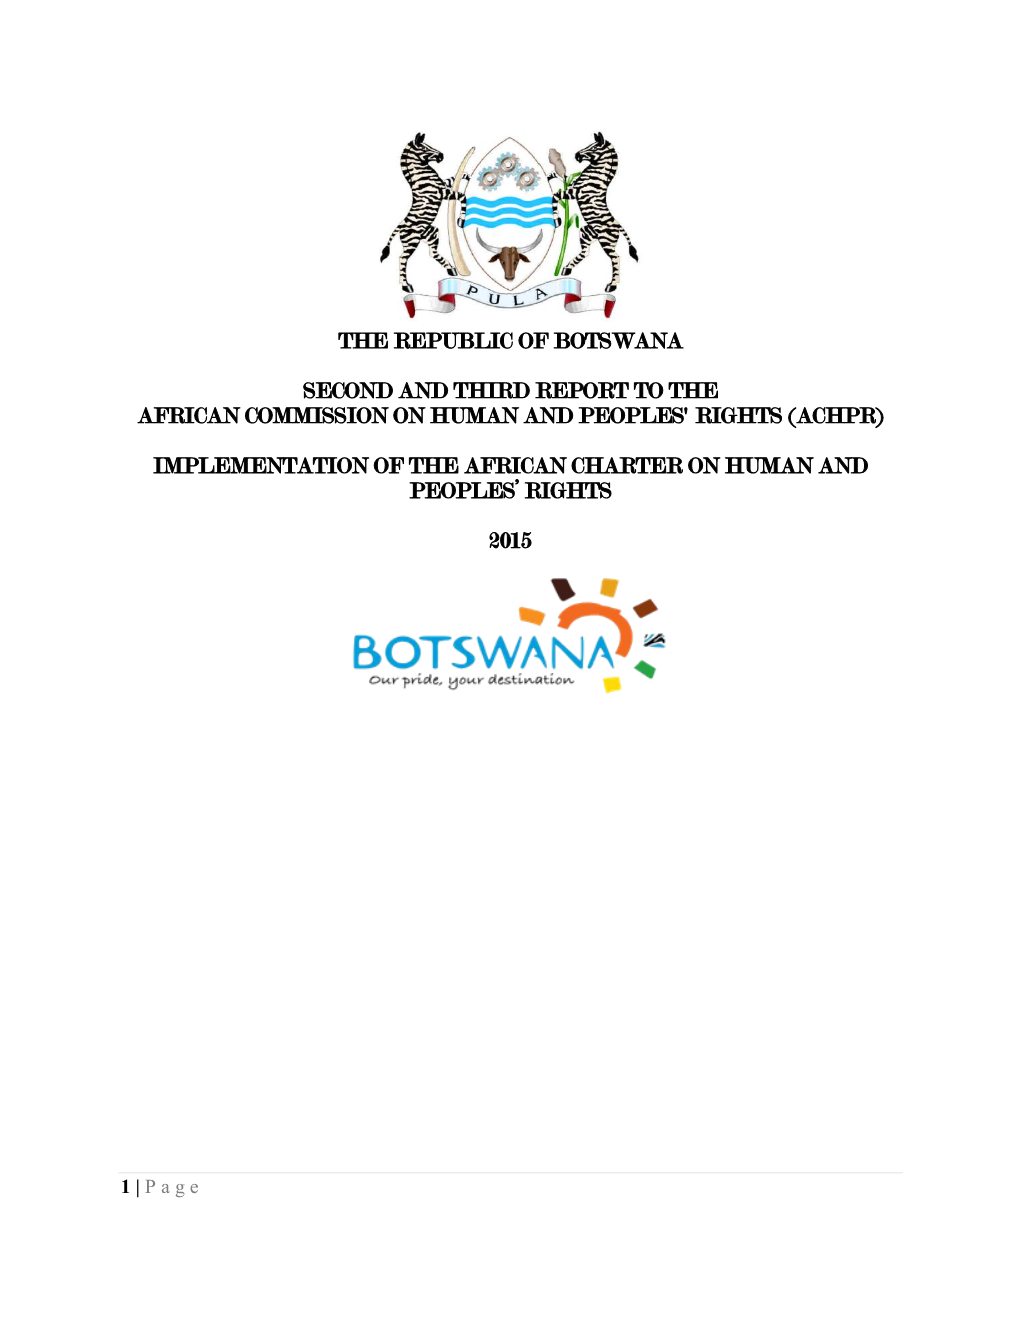 The Republic of Botswana Second and Third Report To